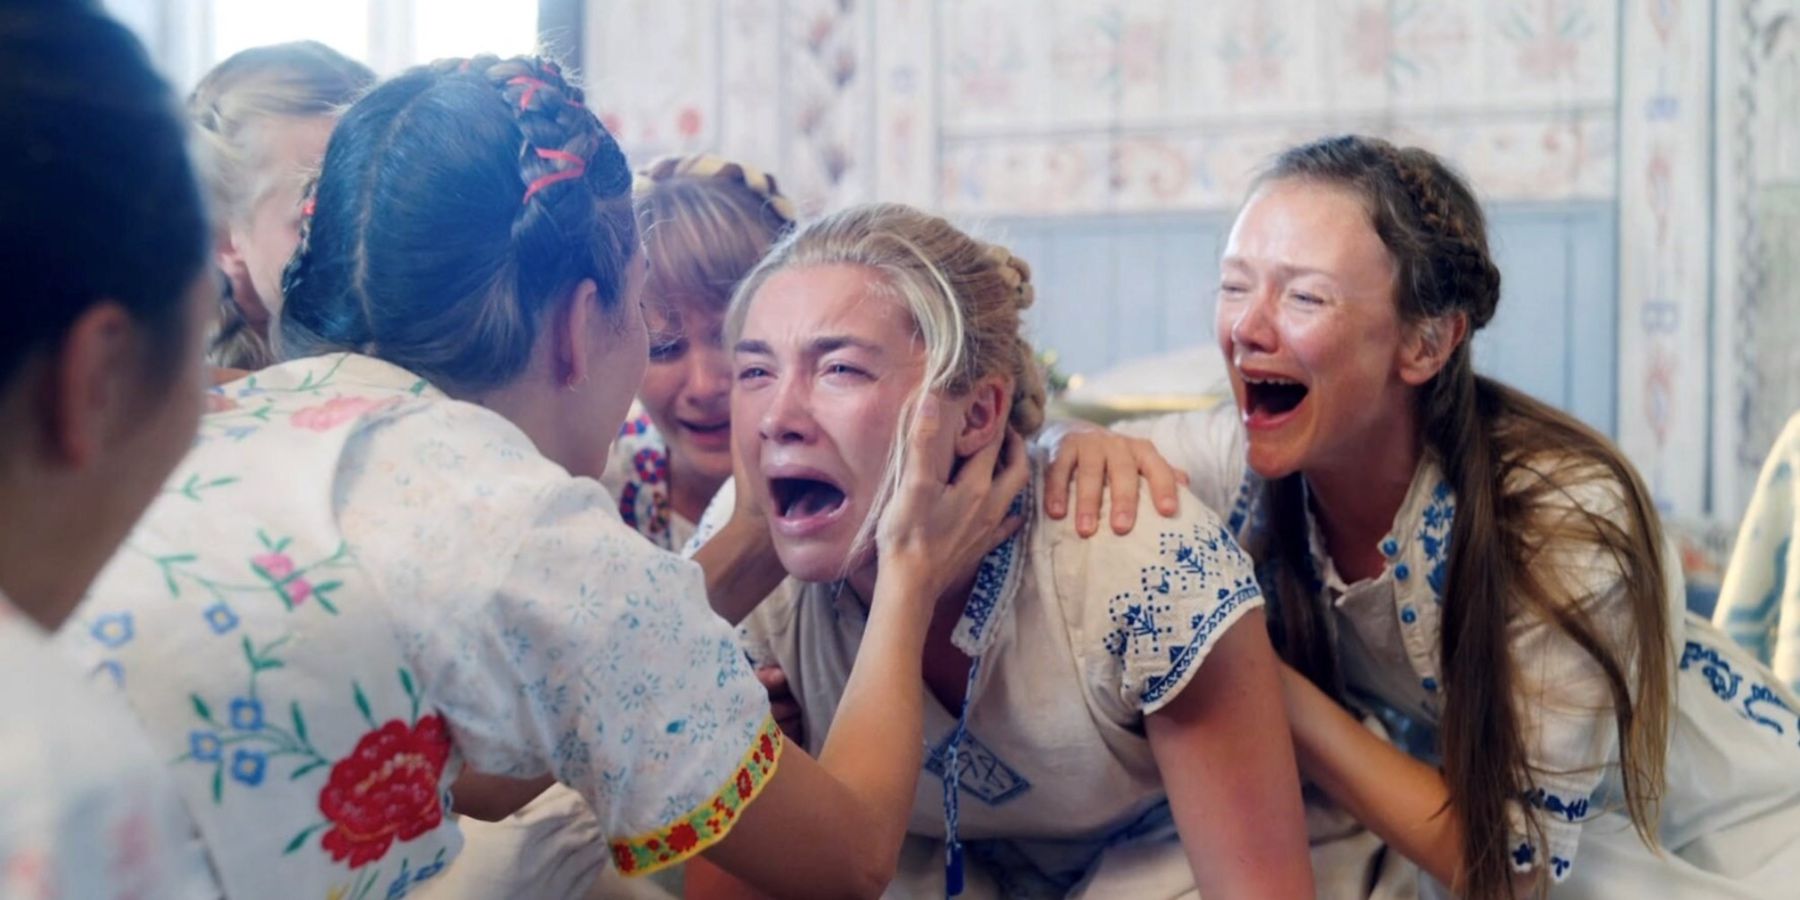 Florence-Pugh-crying-and-screaming-next-to-women-in-Midsommar